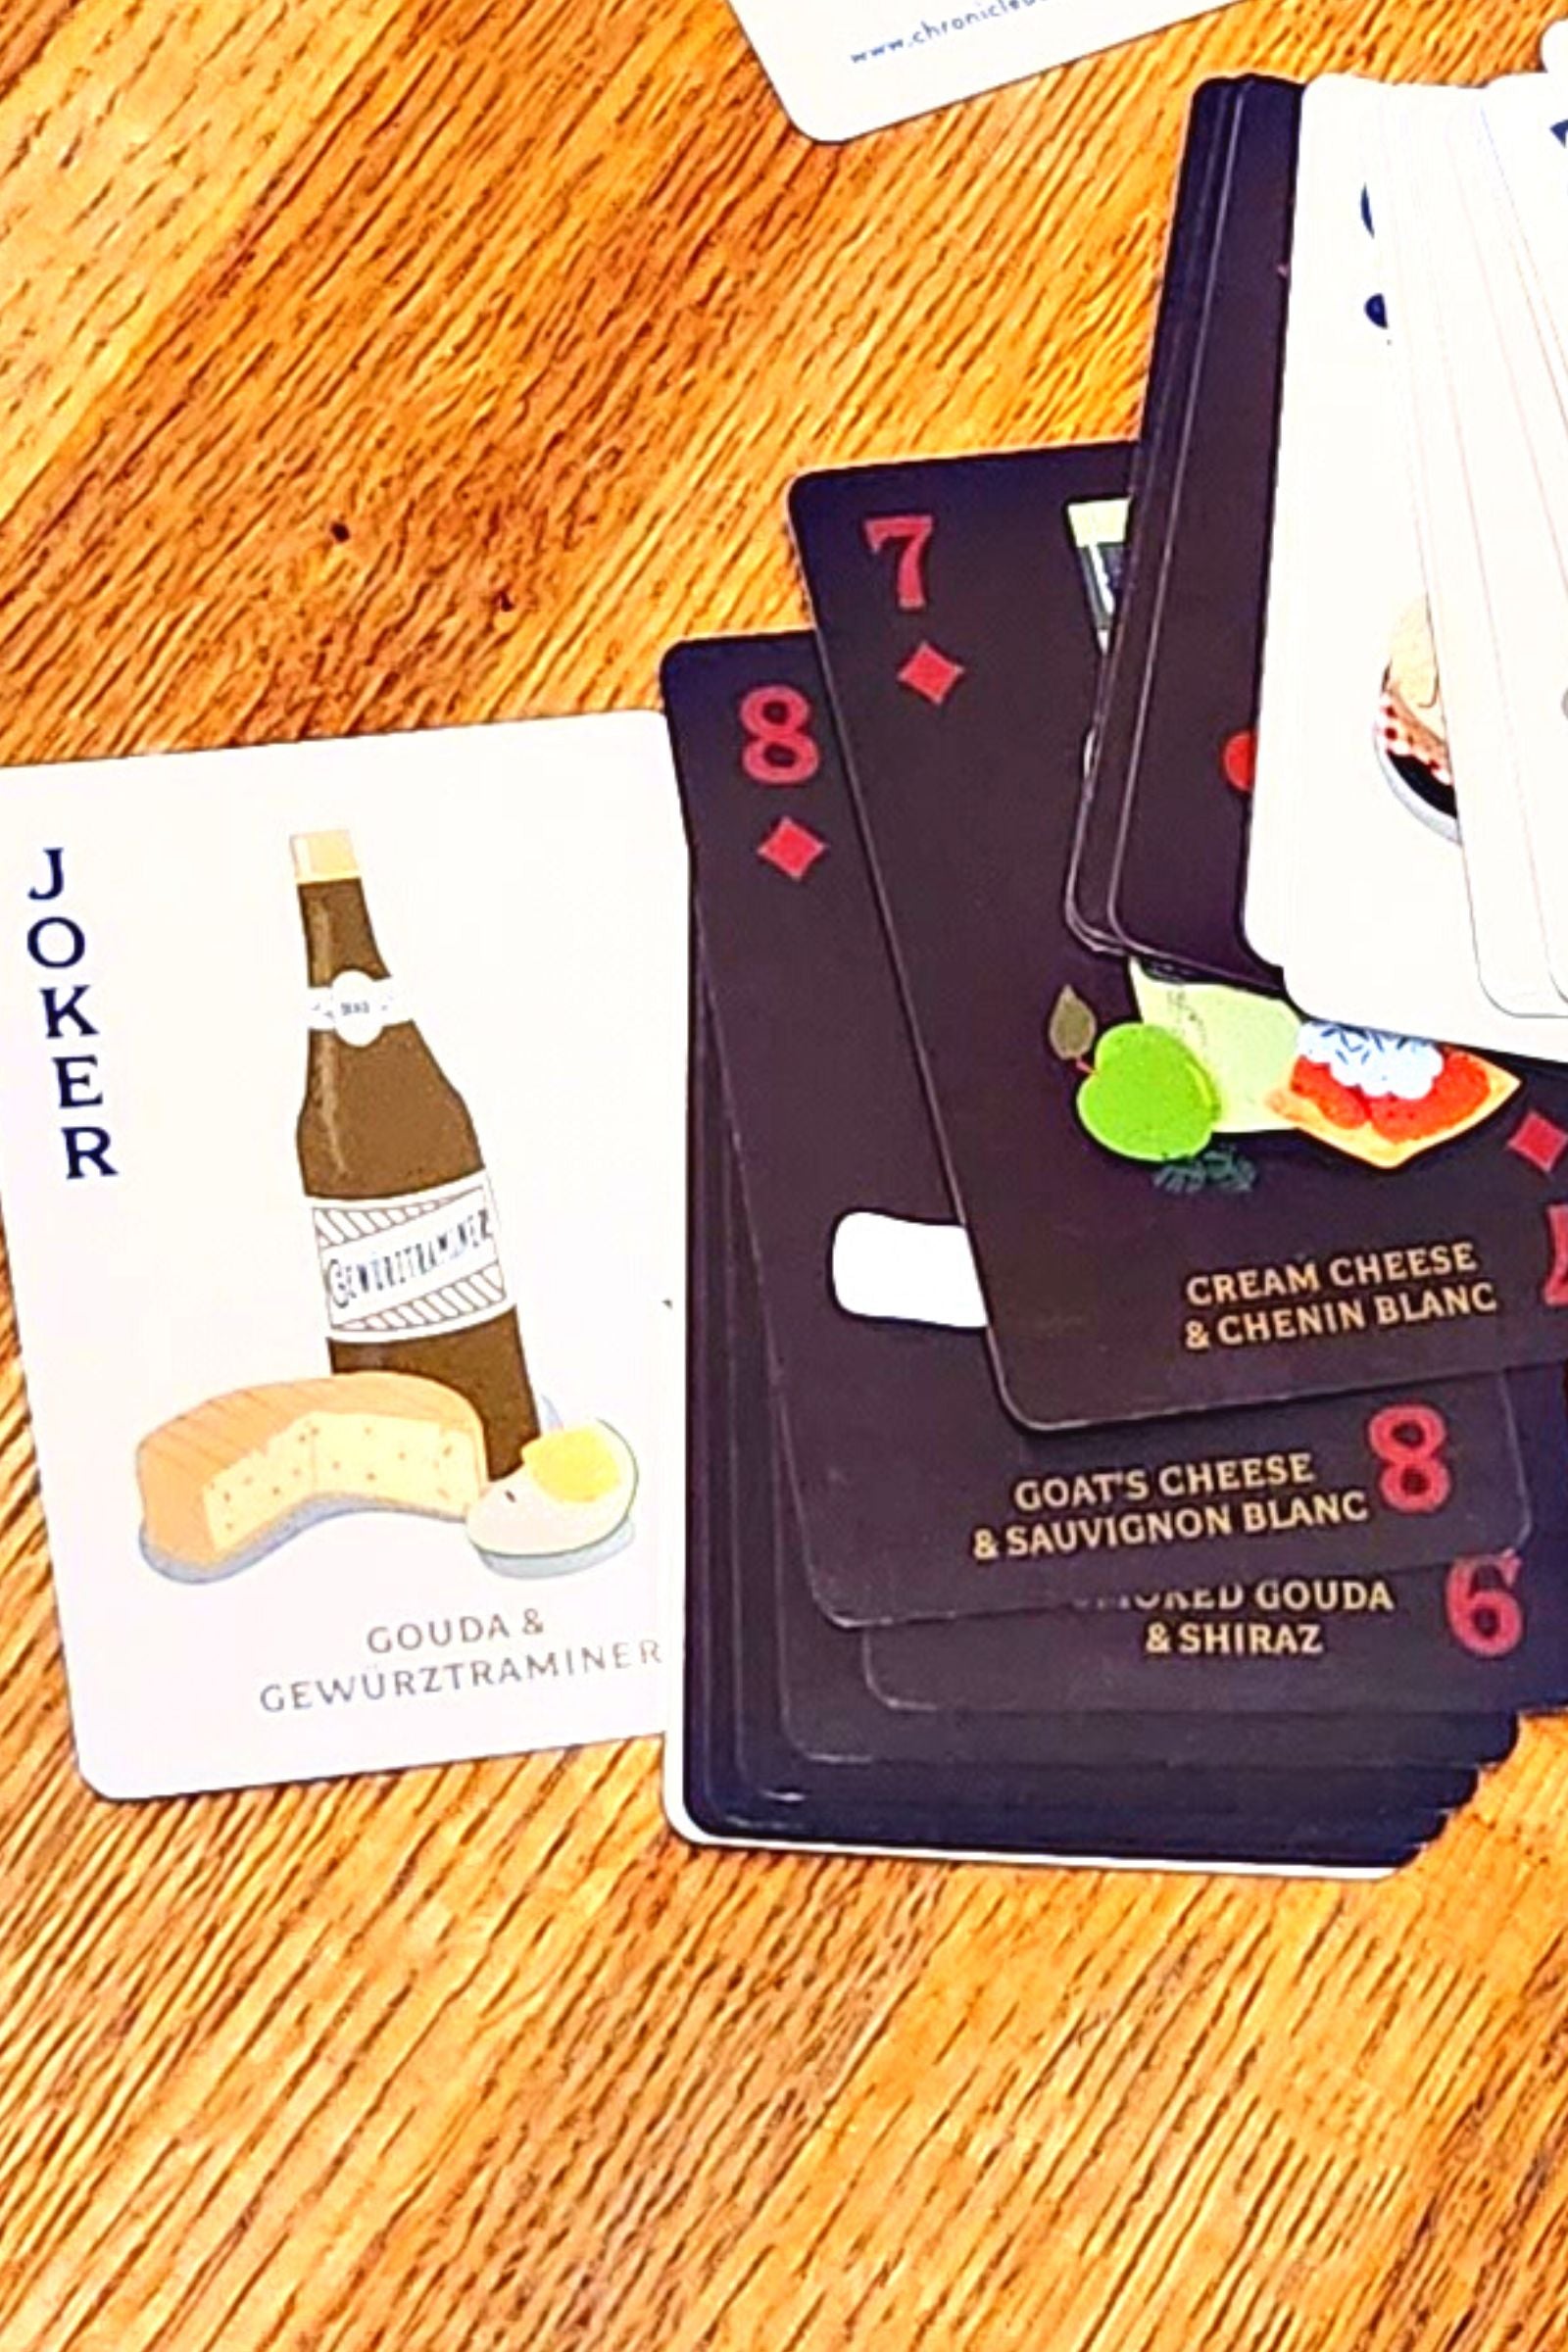 Cheese & Wine Playing Cards